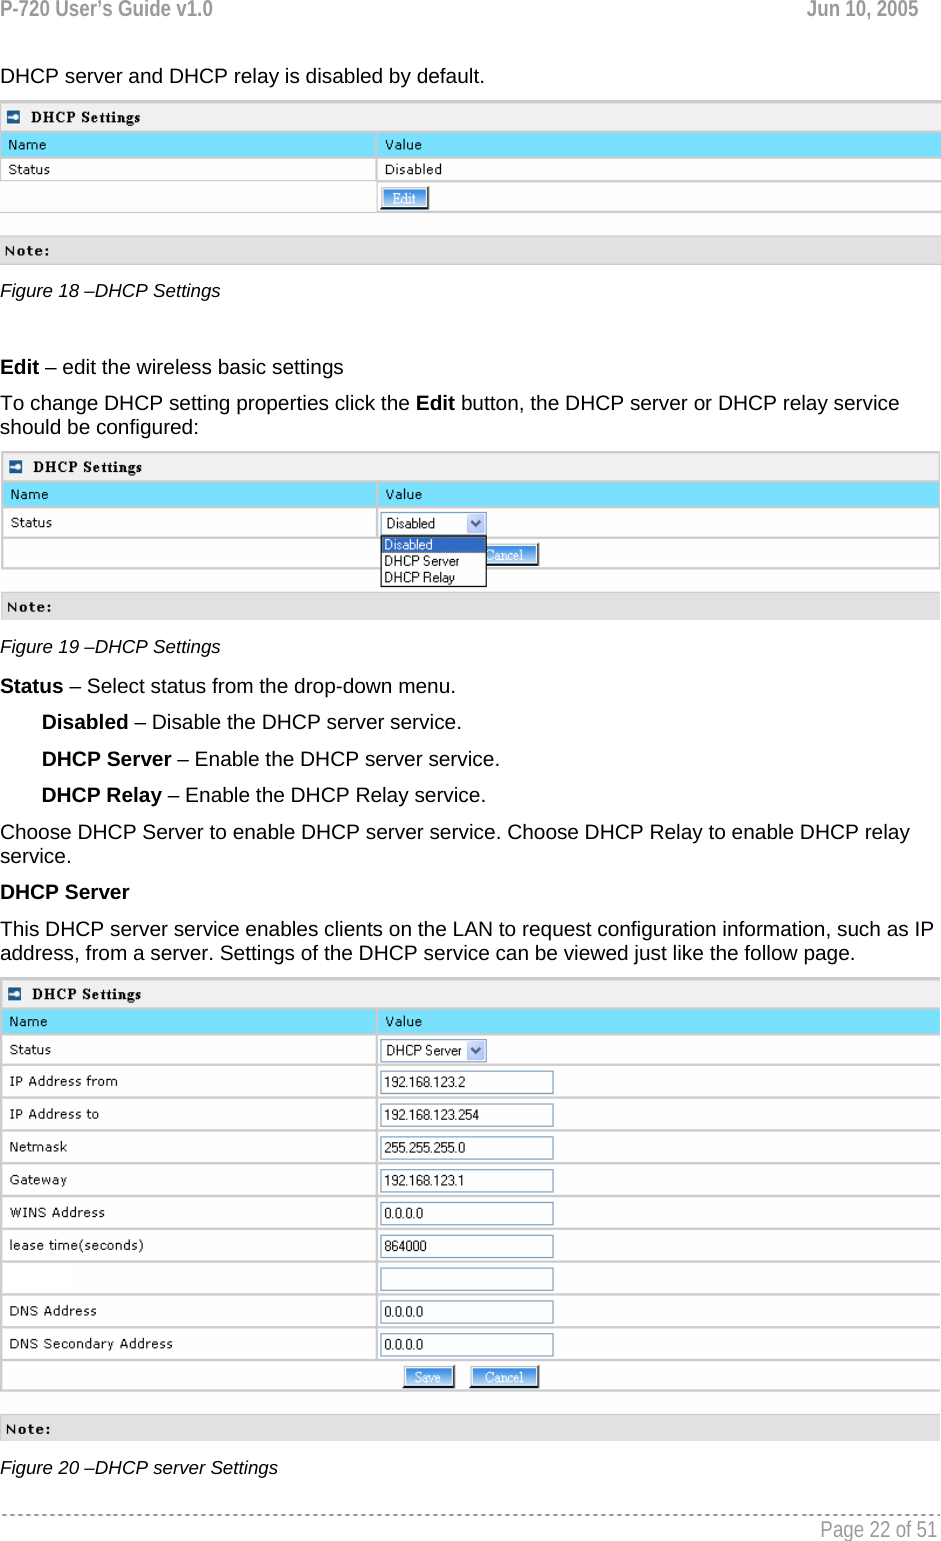 P-720 User’s Guide v1.0  Jun 10, 2005     Page 22 of 51   DHCP server and DHCP relay is disabled by default.  Figure 18 –DHCP Settings  Edit – edit the wireless basic settings To change DHCP setting properties click the Edit button, the DHCP server or DHCP relay service should be configured:  Figure 19 –DHCP Settings Status – Select status from the drop-down menu. Disabled – Disable the DHCP server service. DHCP Server – Enable the DHCP server service. DHCP Relay – Enable the DHCP Relay service. Choose DHCP Server to enable DHCP server service. Choose DHCP Relay to enable DHCP relay service. DHCP Server This DHCP server service enables clients on the LAN to request configuration information, such as IP address, from a server. Settings of the DHCP service can be viewed just like the follow page.  Figure 20 –DHCP server Settings 